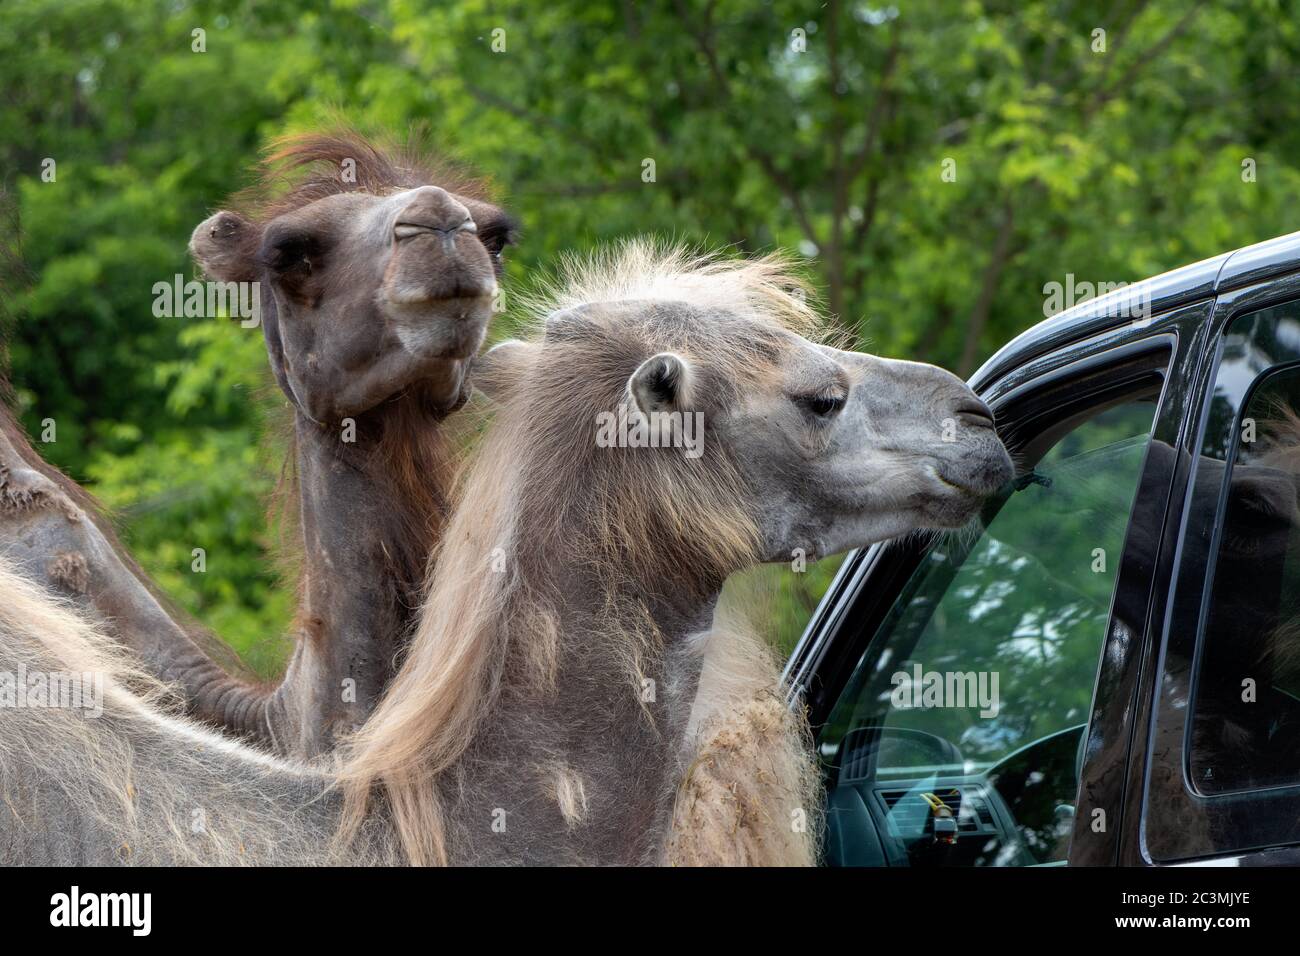 SZADA, HUNGARY - JUNE 01, 2020 - Camels are looking for food in visitor's car in a car safari park in Hungary Stock Photo